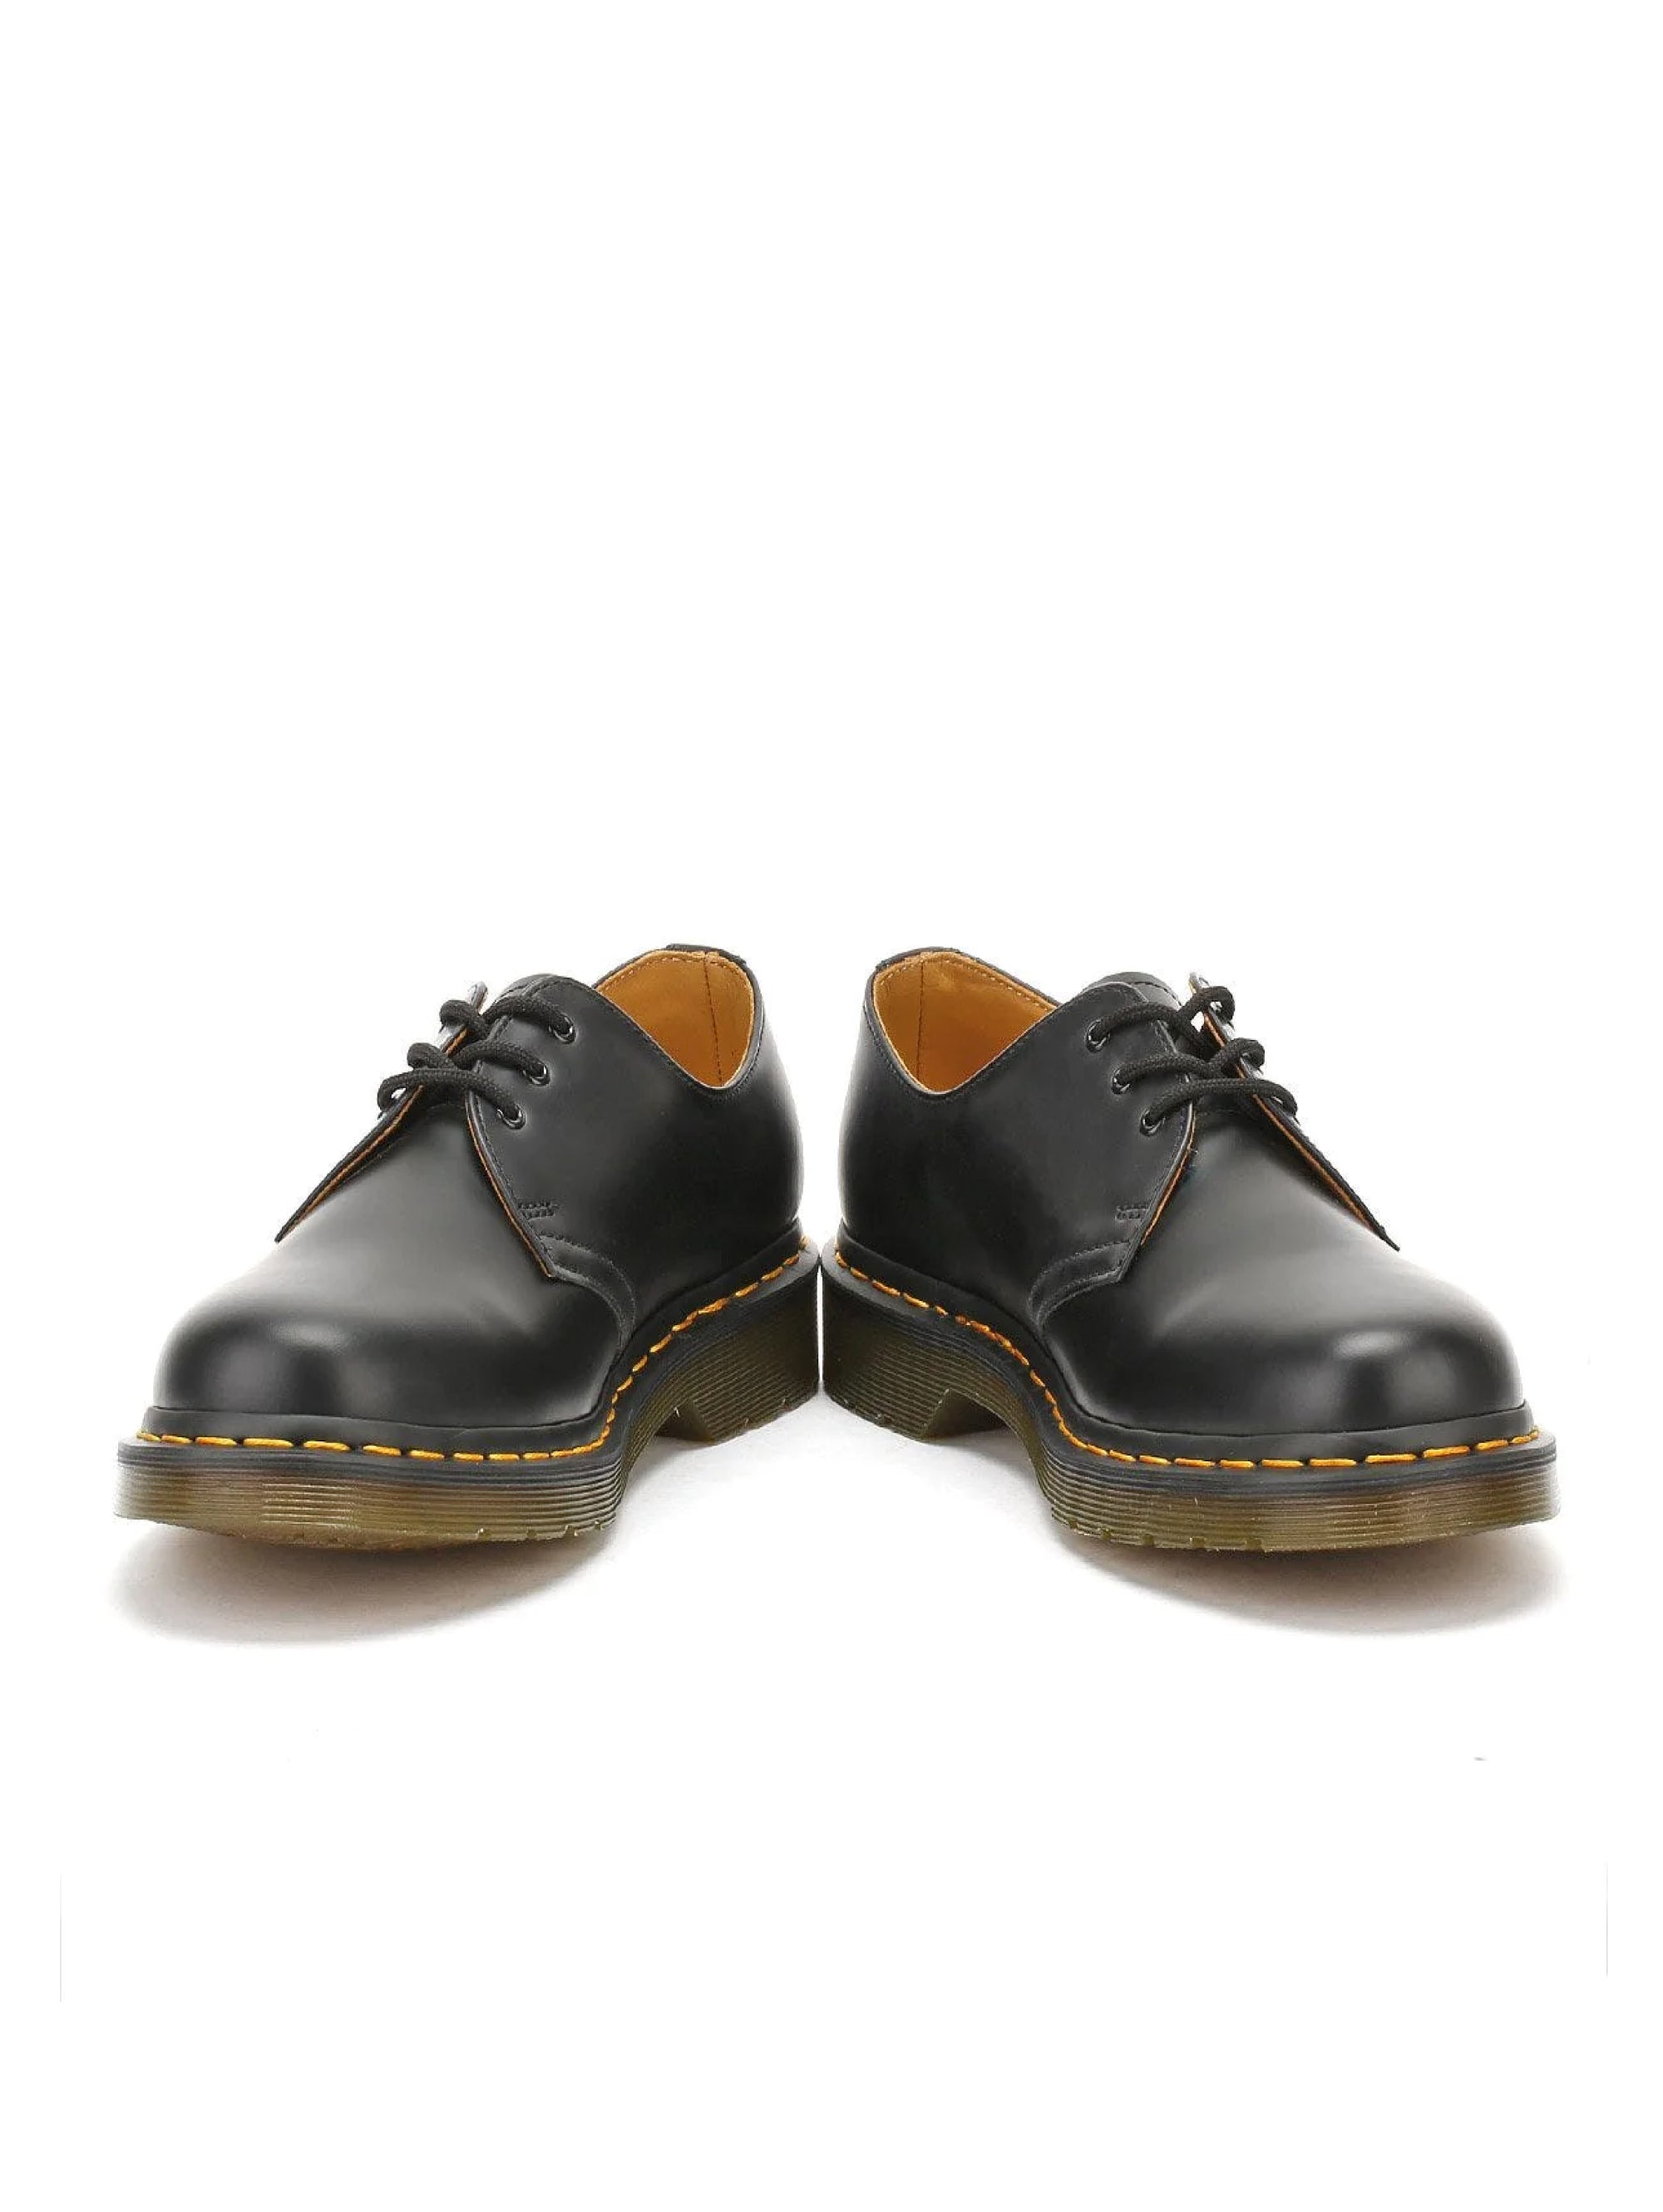 Lace-ups with Three Eyelets for Men in Black